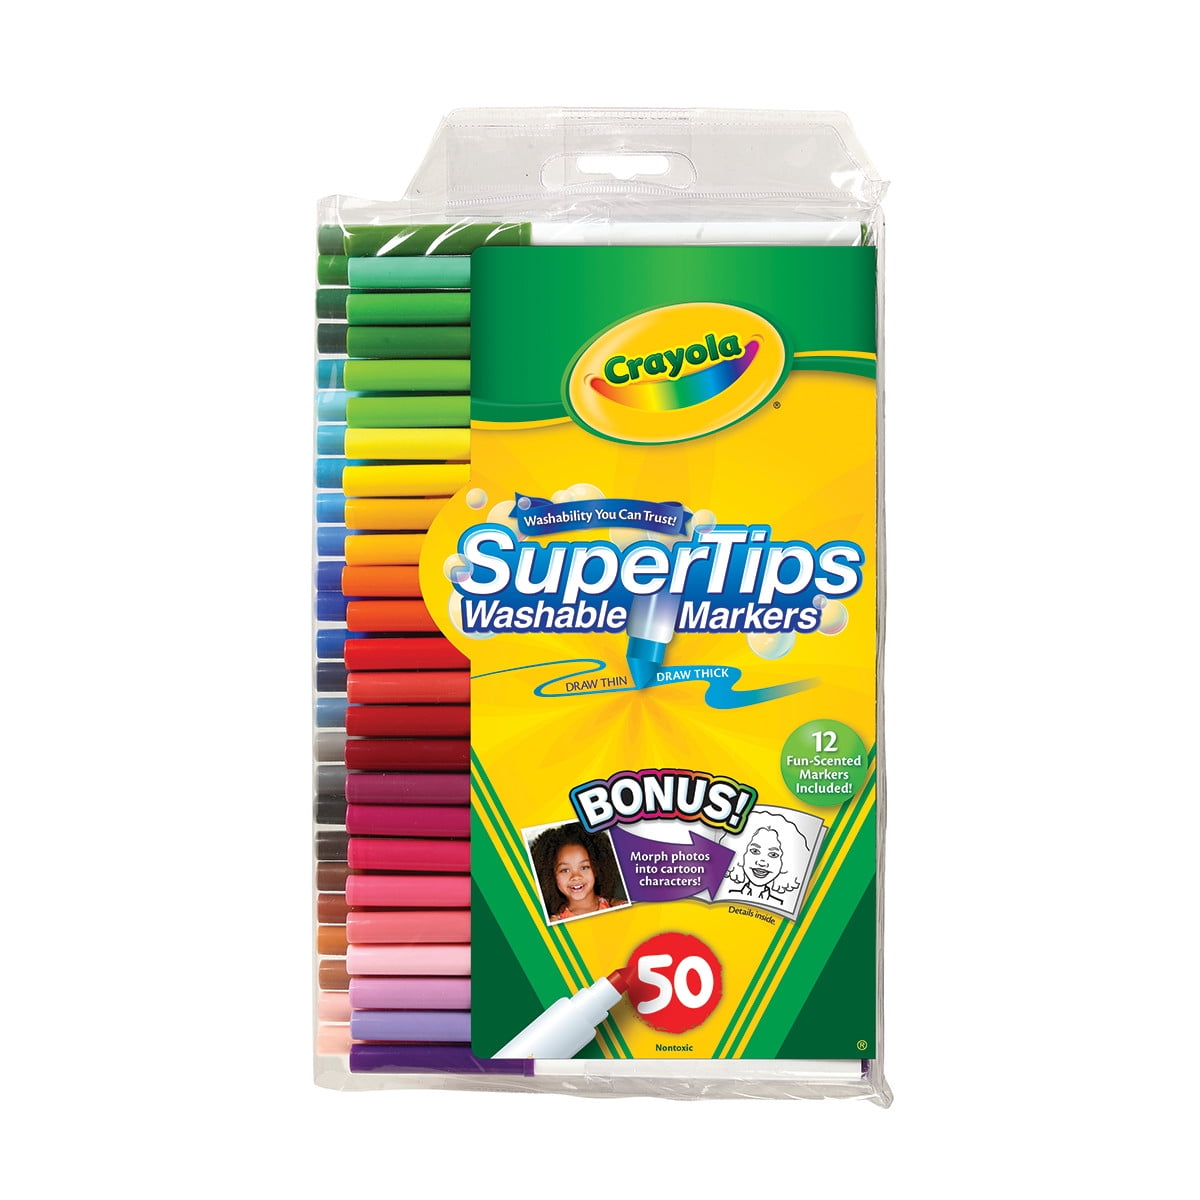 Create & Color Super Tips Washable Markers Kit by Crayola at Fleet